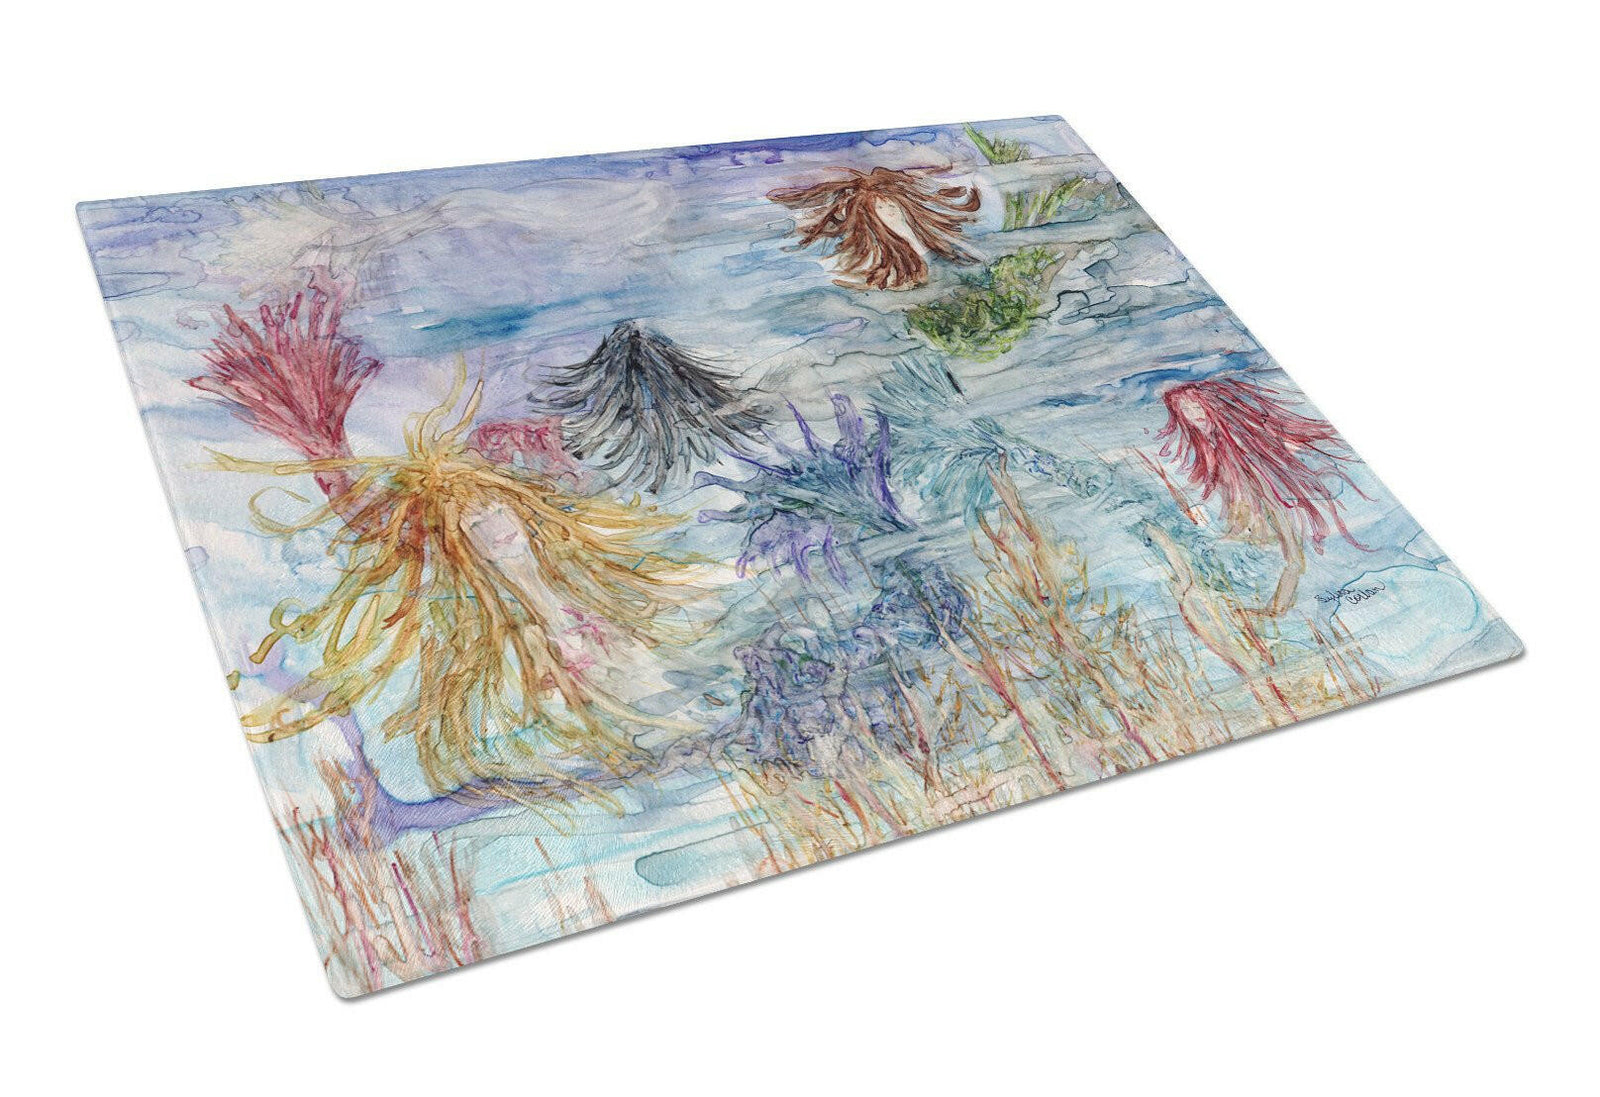 Abstract Mermaid Water Fantasy Glass Cutting Board Large 8975LCB by Caroline's Treasures